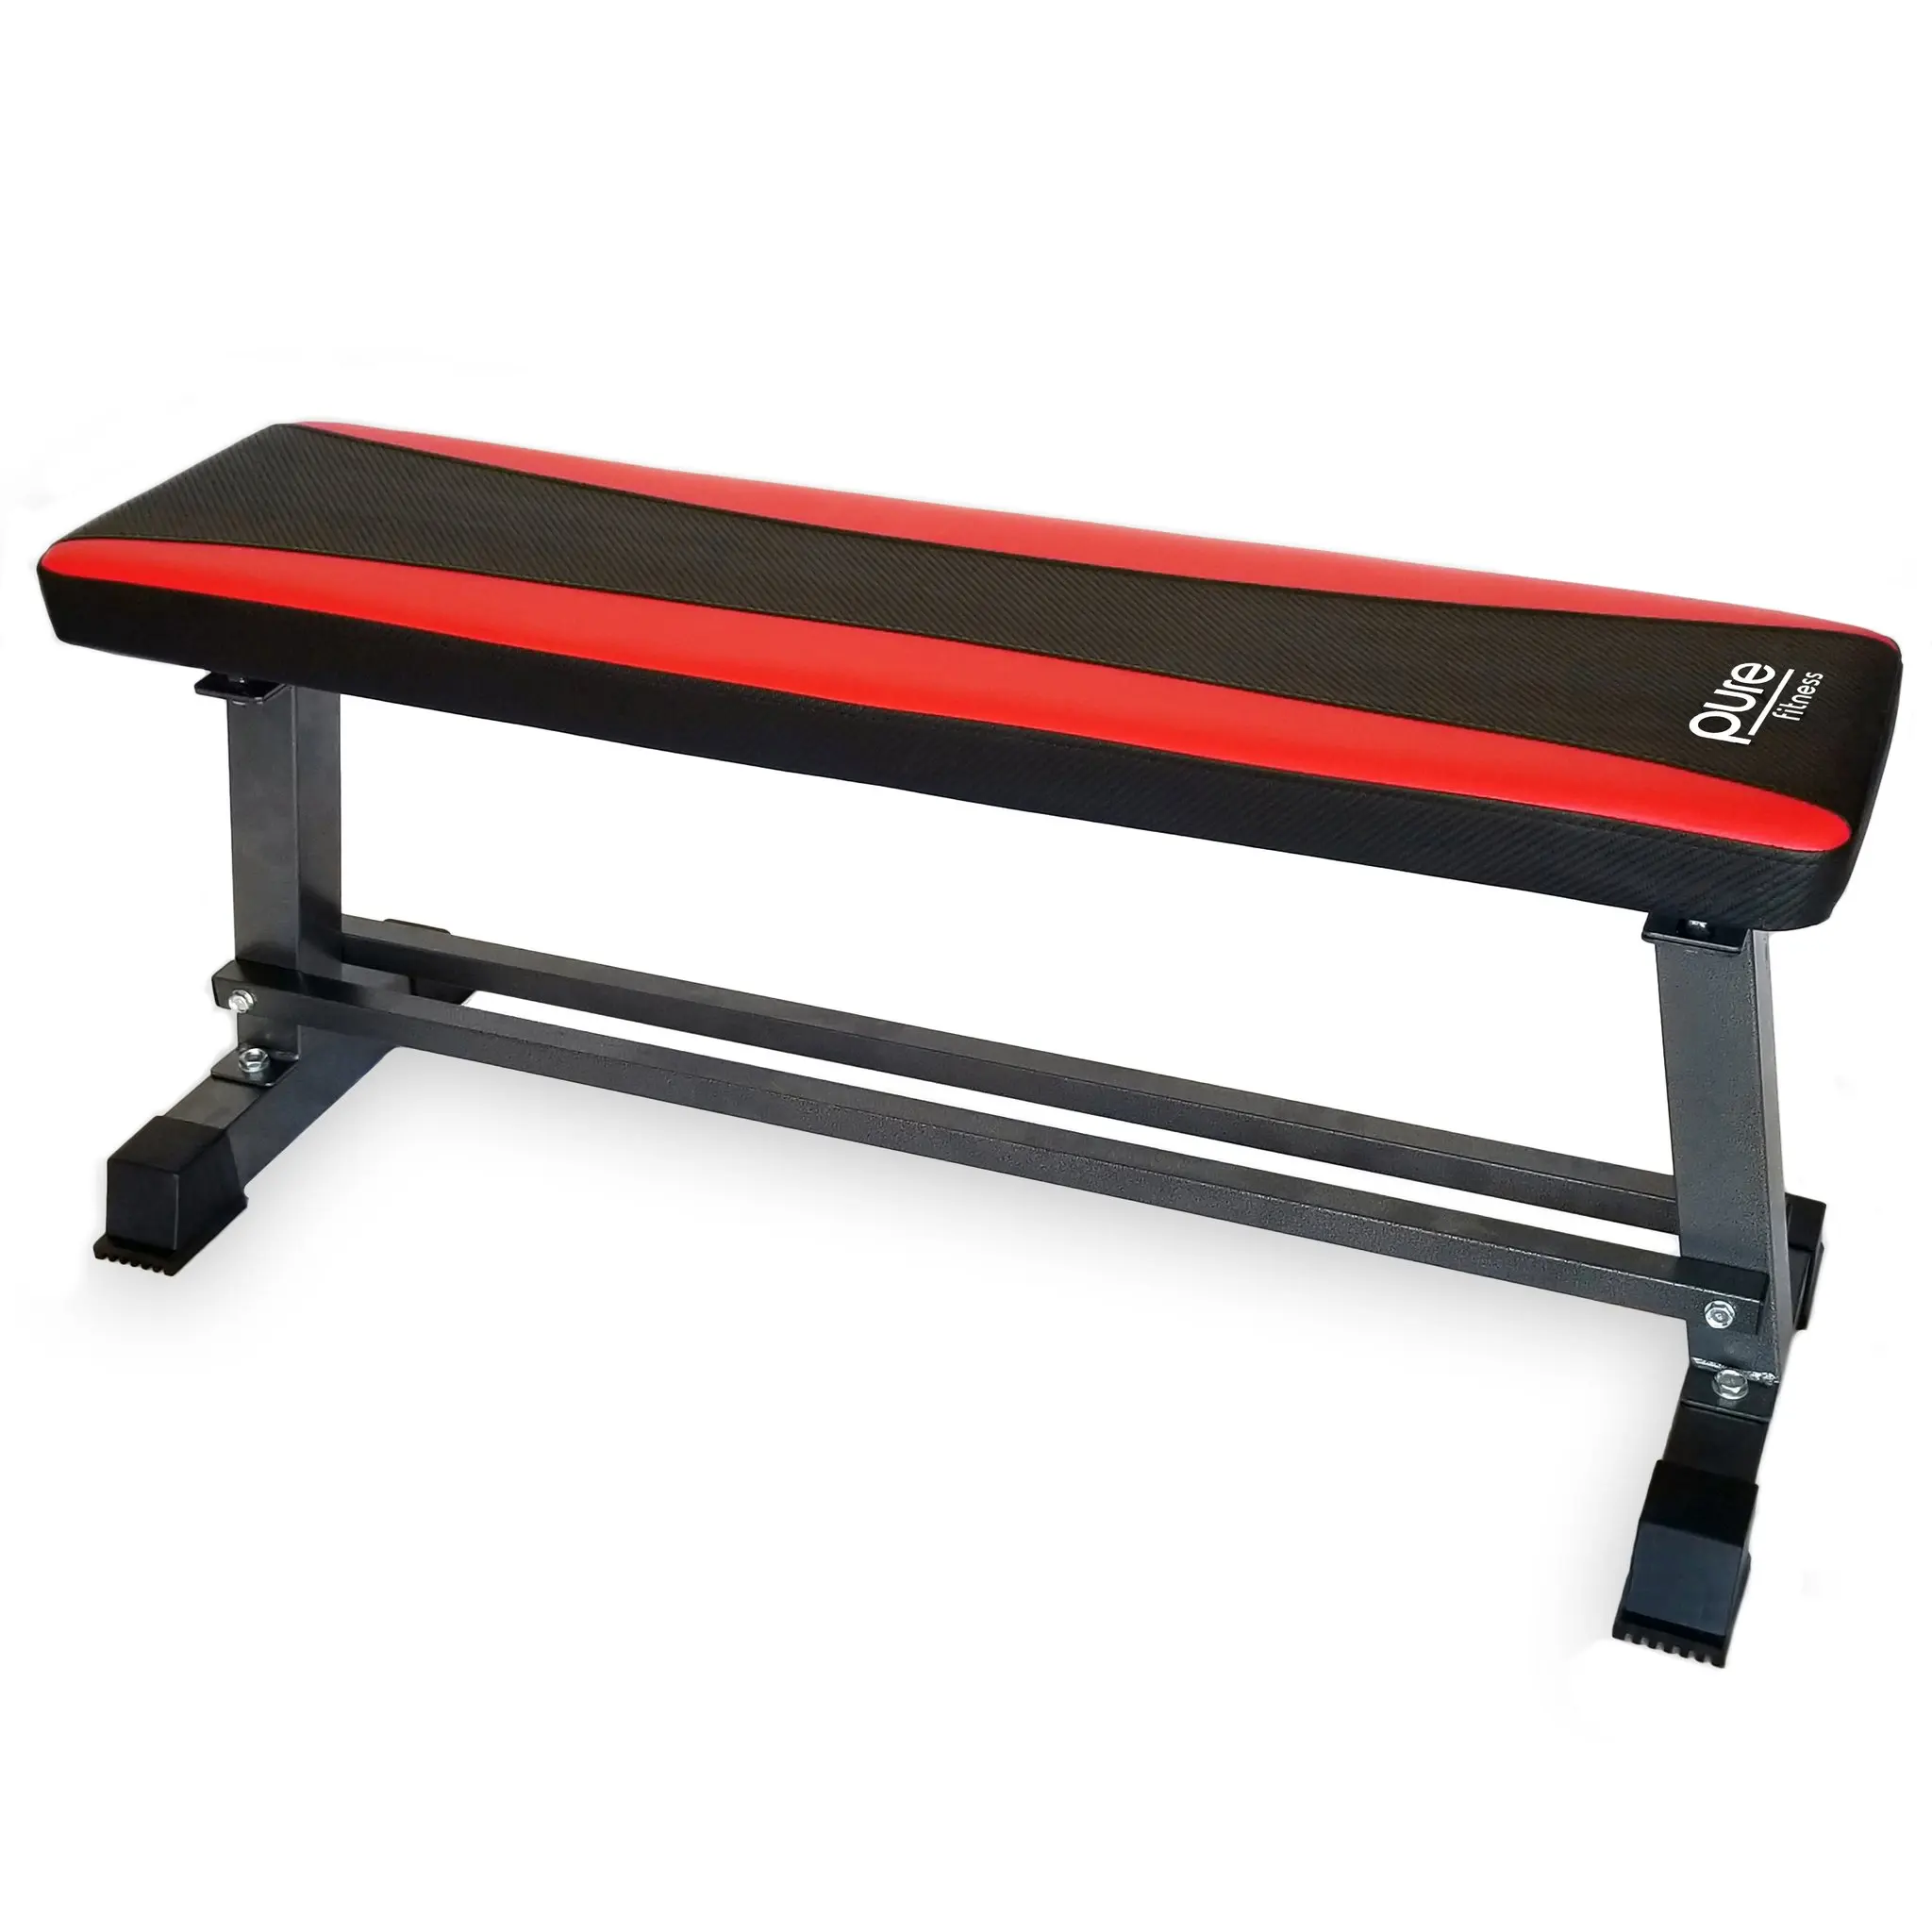 

2018 best sale cheap ningbo Sports Fitness Steel Frame Flat Weight Training adjustable gym weight bench equipment, Customized color